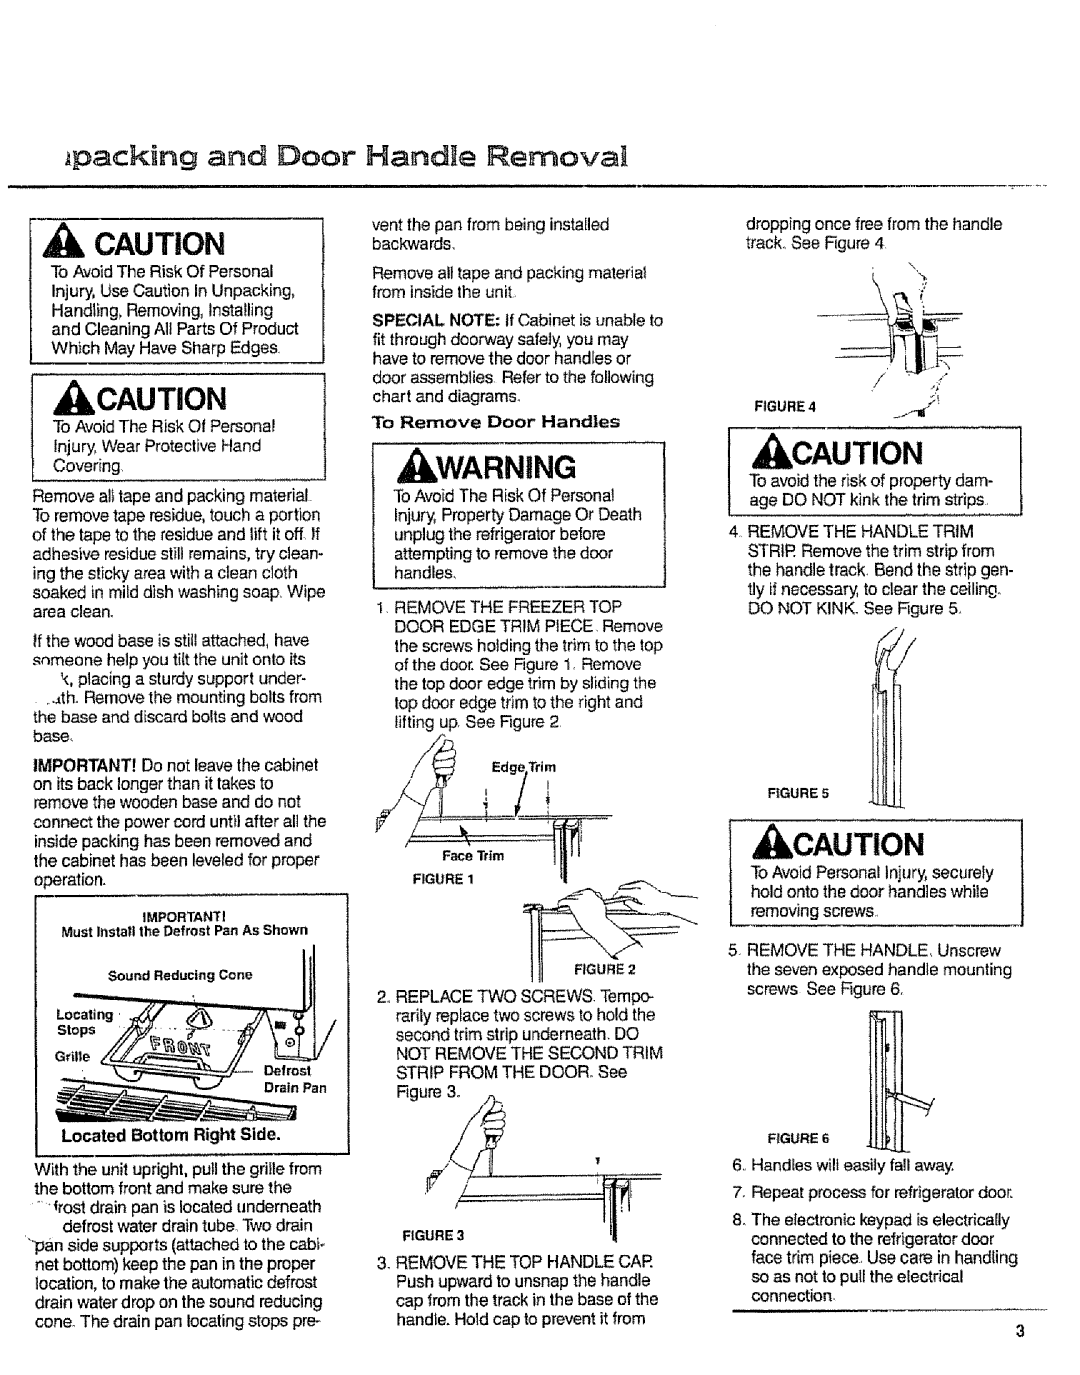 Sears 10062603 manual Acaution, packing and Door, Handtle Removal, Located Bottom Right Side, To Remove Door Handles, Trim 